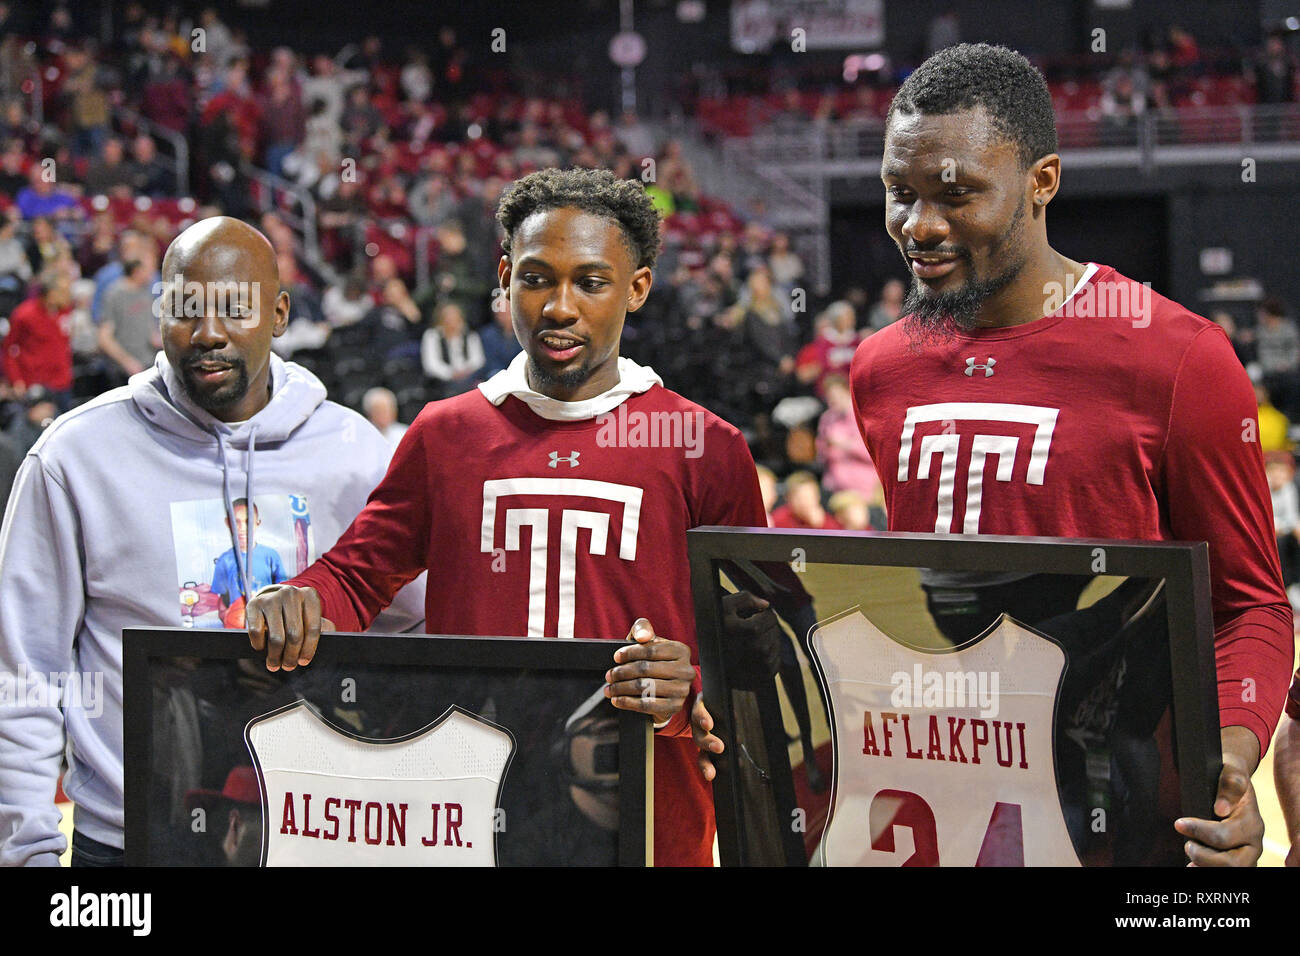 Philadelphia, Pennsylvania, USA. 9th Mar, 2019. Temple Owls guard SHIZZ ALSTON JR. (10) and center ERNEST AFLAKPUI (24) are honored in senior day ceremonies prior to the American Athletic Conference basketball game played at the Liacouras Center in Philadelphia. Temple beat #25 UCF 67-62. Credit: Ken Inness/ZUMA Wire/Alamy Live News Stock Photo